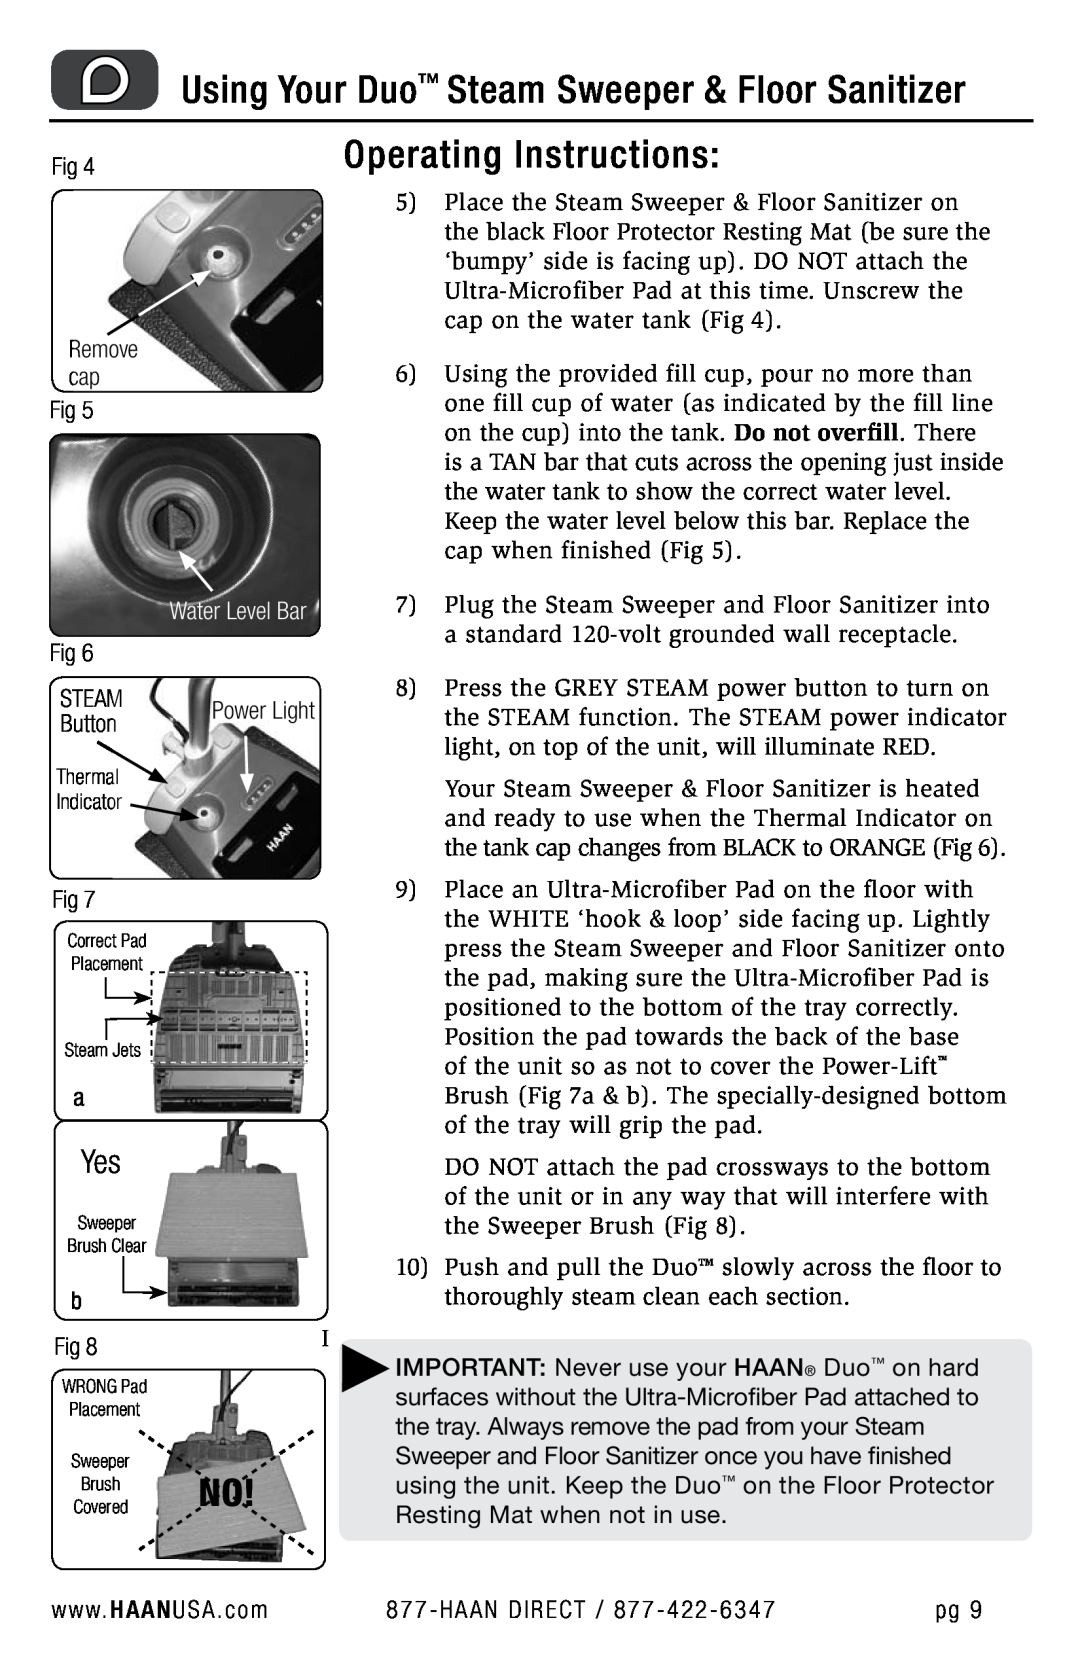 Haan HD-50 user manual Using Your Duo Steam Sweeper & Floor Sanitizer, Operating Instructions, Water Level Bar 